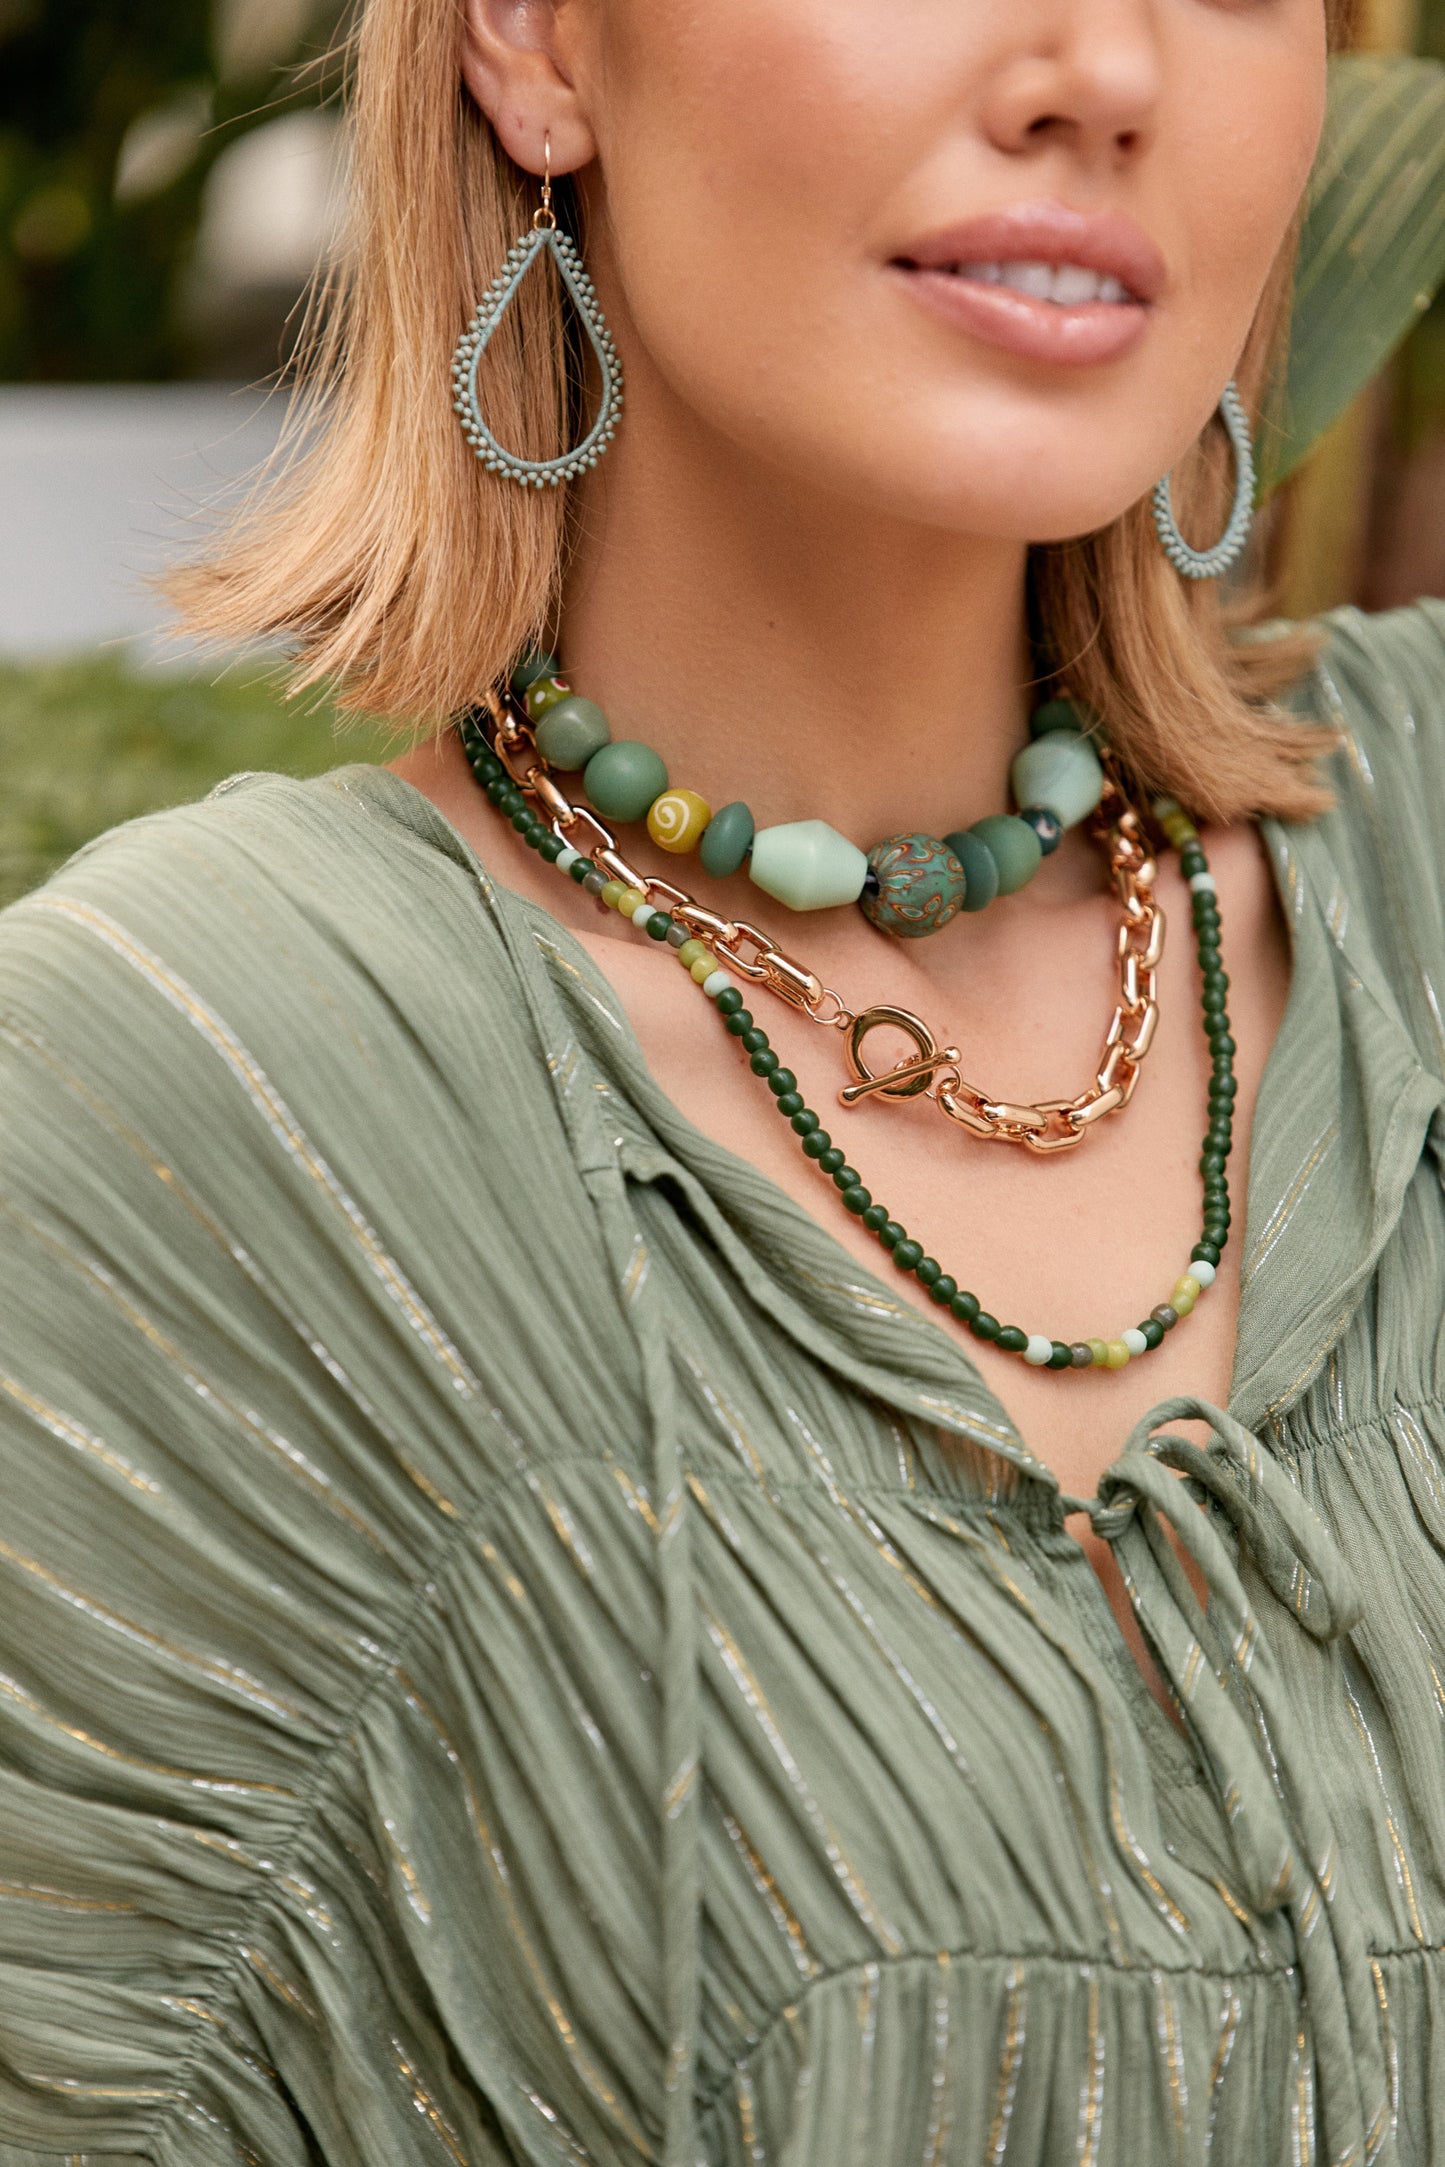 Burleigh Fine Bead Layering Necklace in Green Multi and Tan Multi